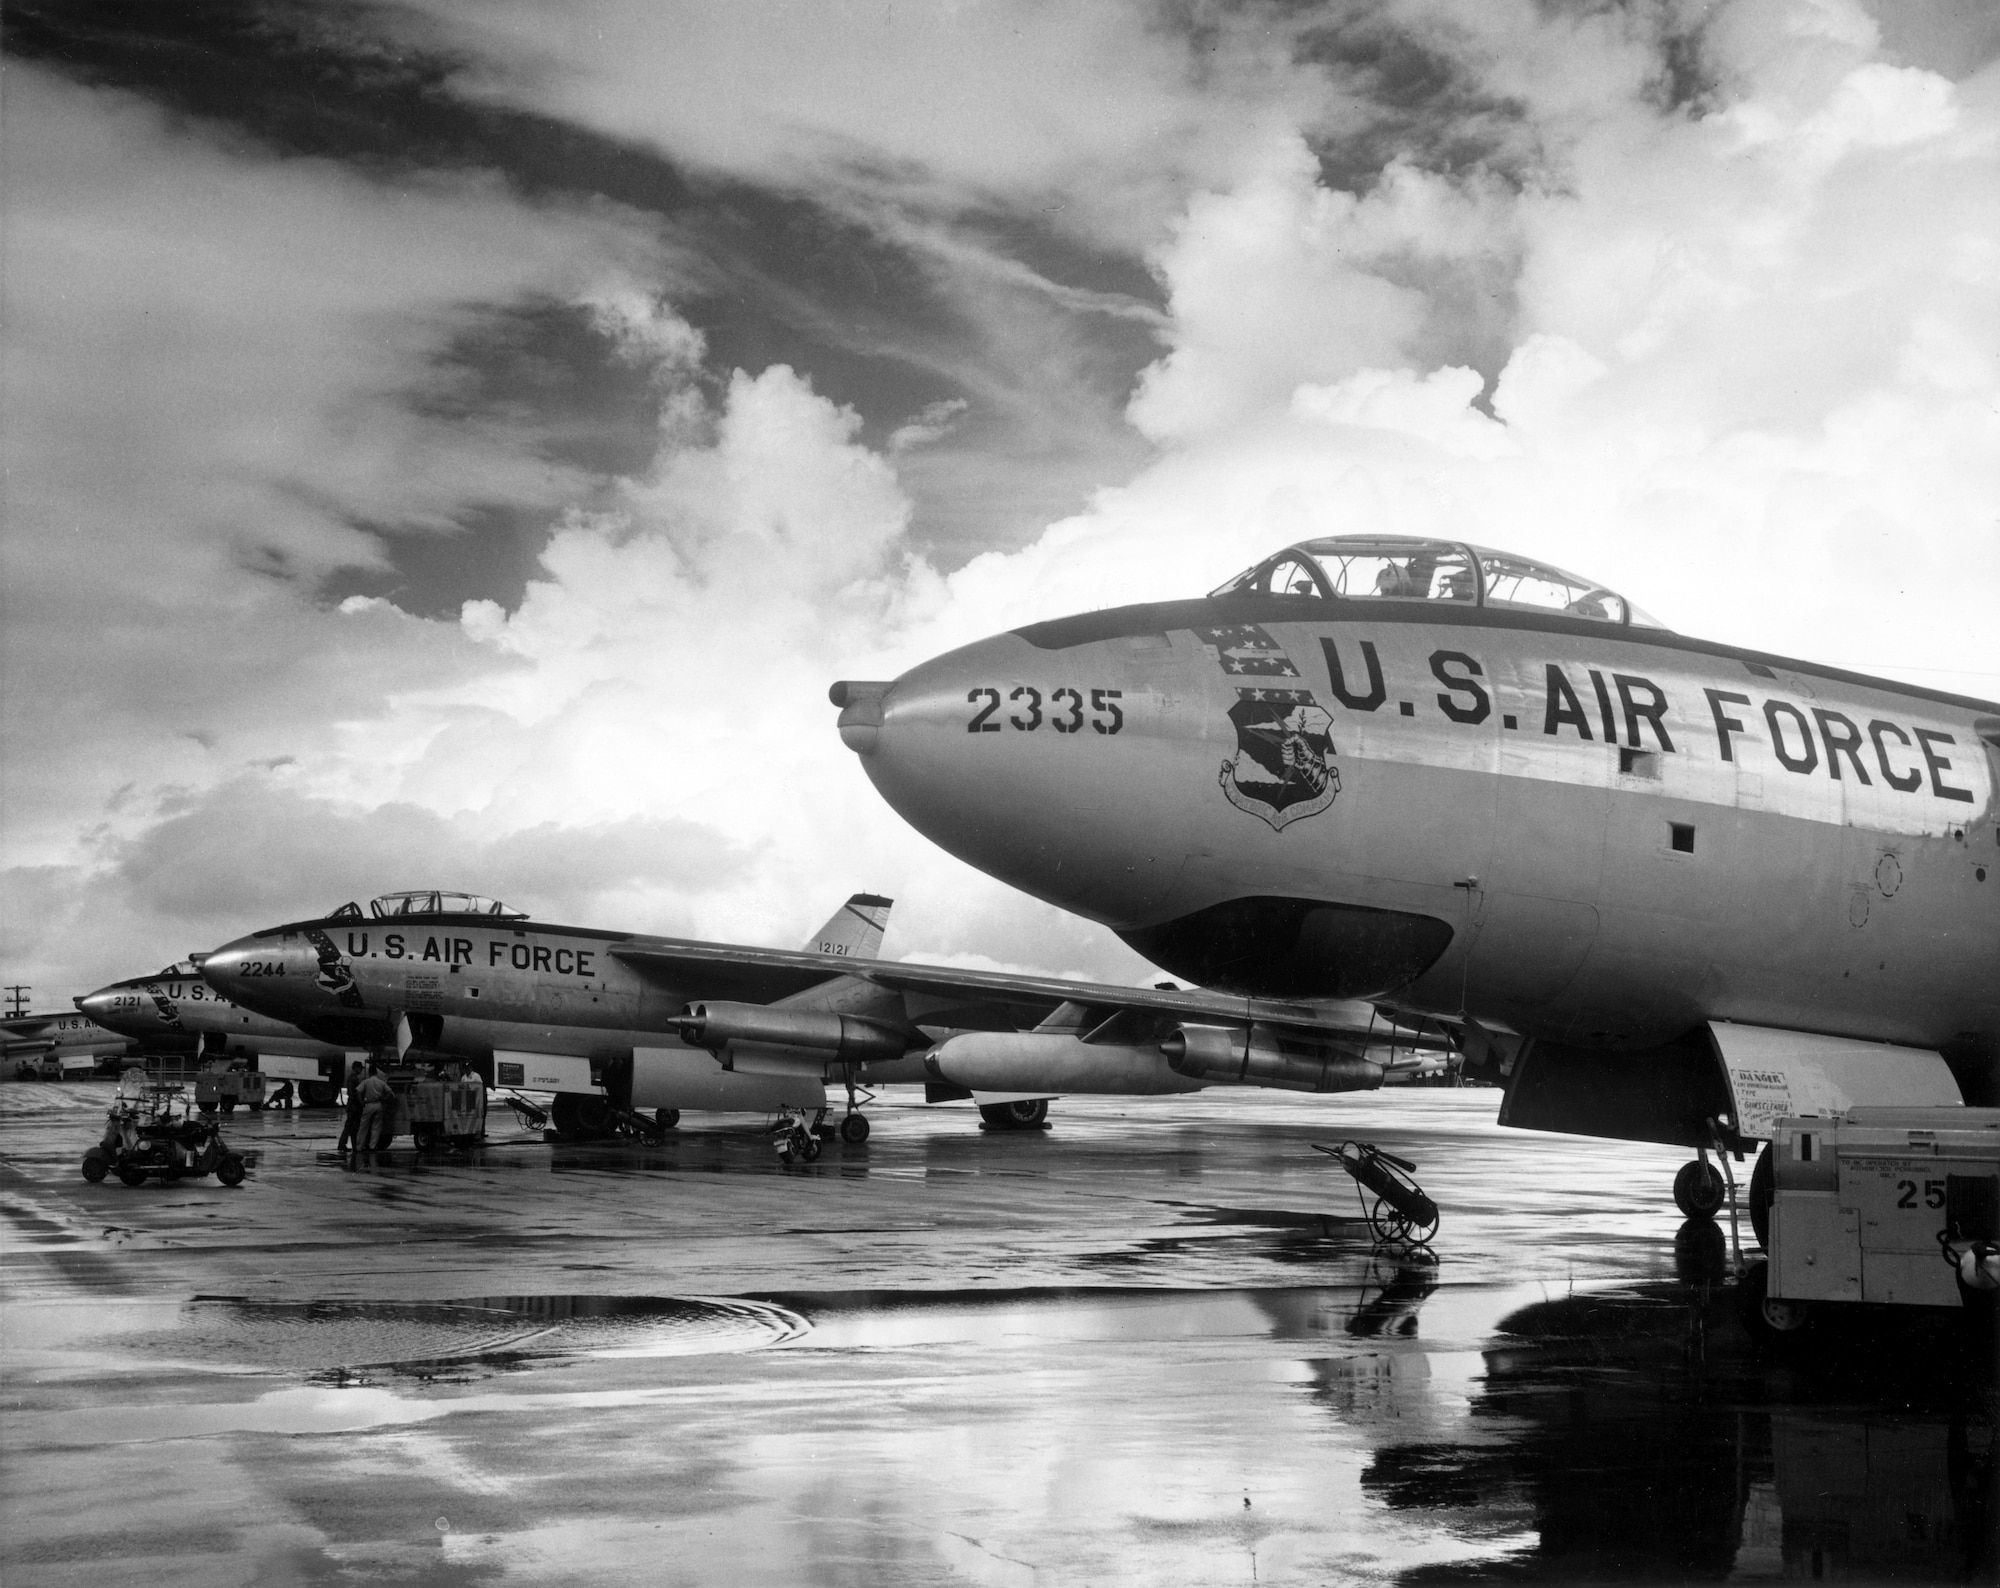 1950's -- Strategic Air Command B-47 Stratojet bombers. The world's first swept-wing bomber. The B-47 normally carried a crew of three--pilot, copilot (who operated the tail turret by remote control), and an observer who also served as navigator, bombardier and radar operator.